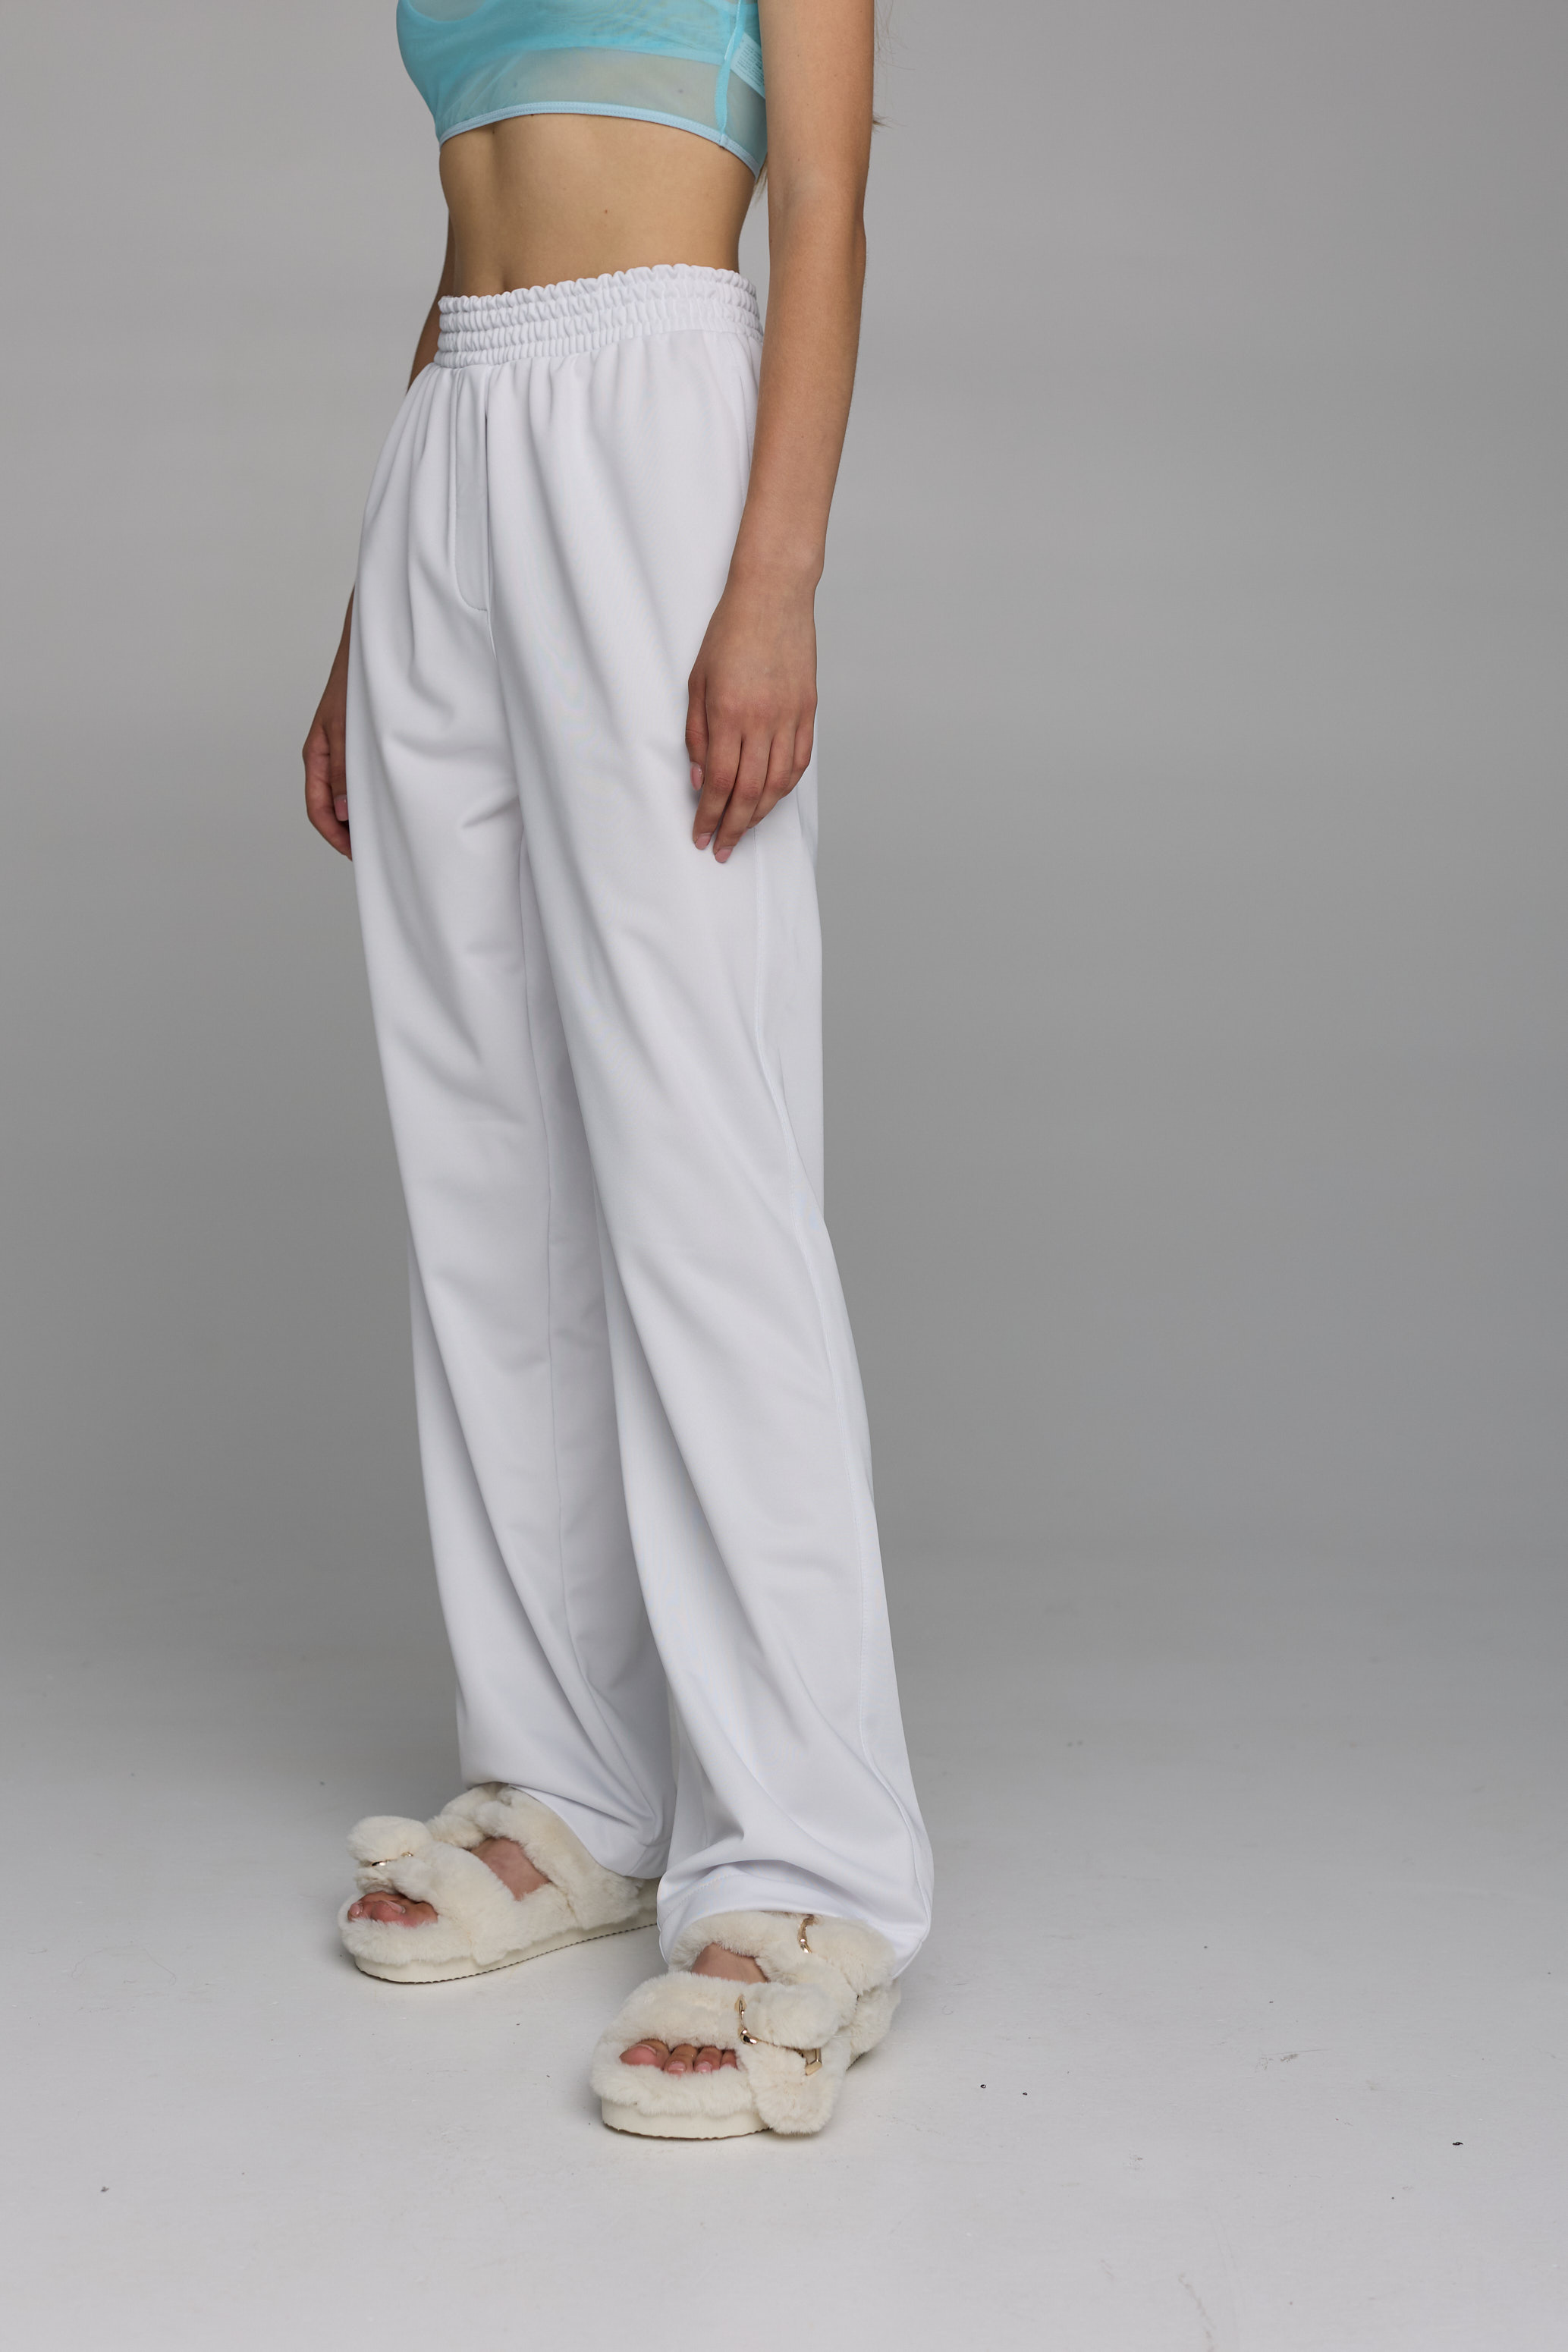 trousers athletic in white color